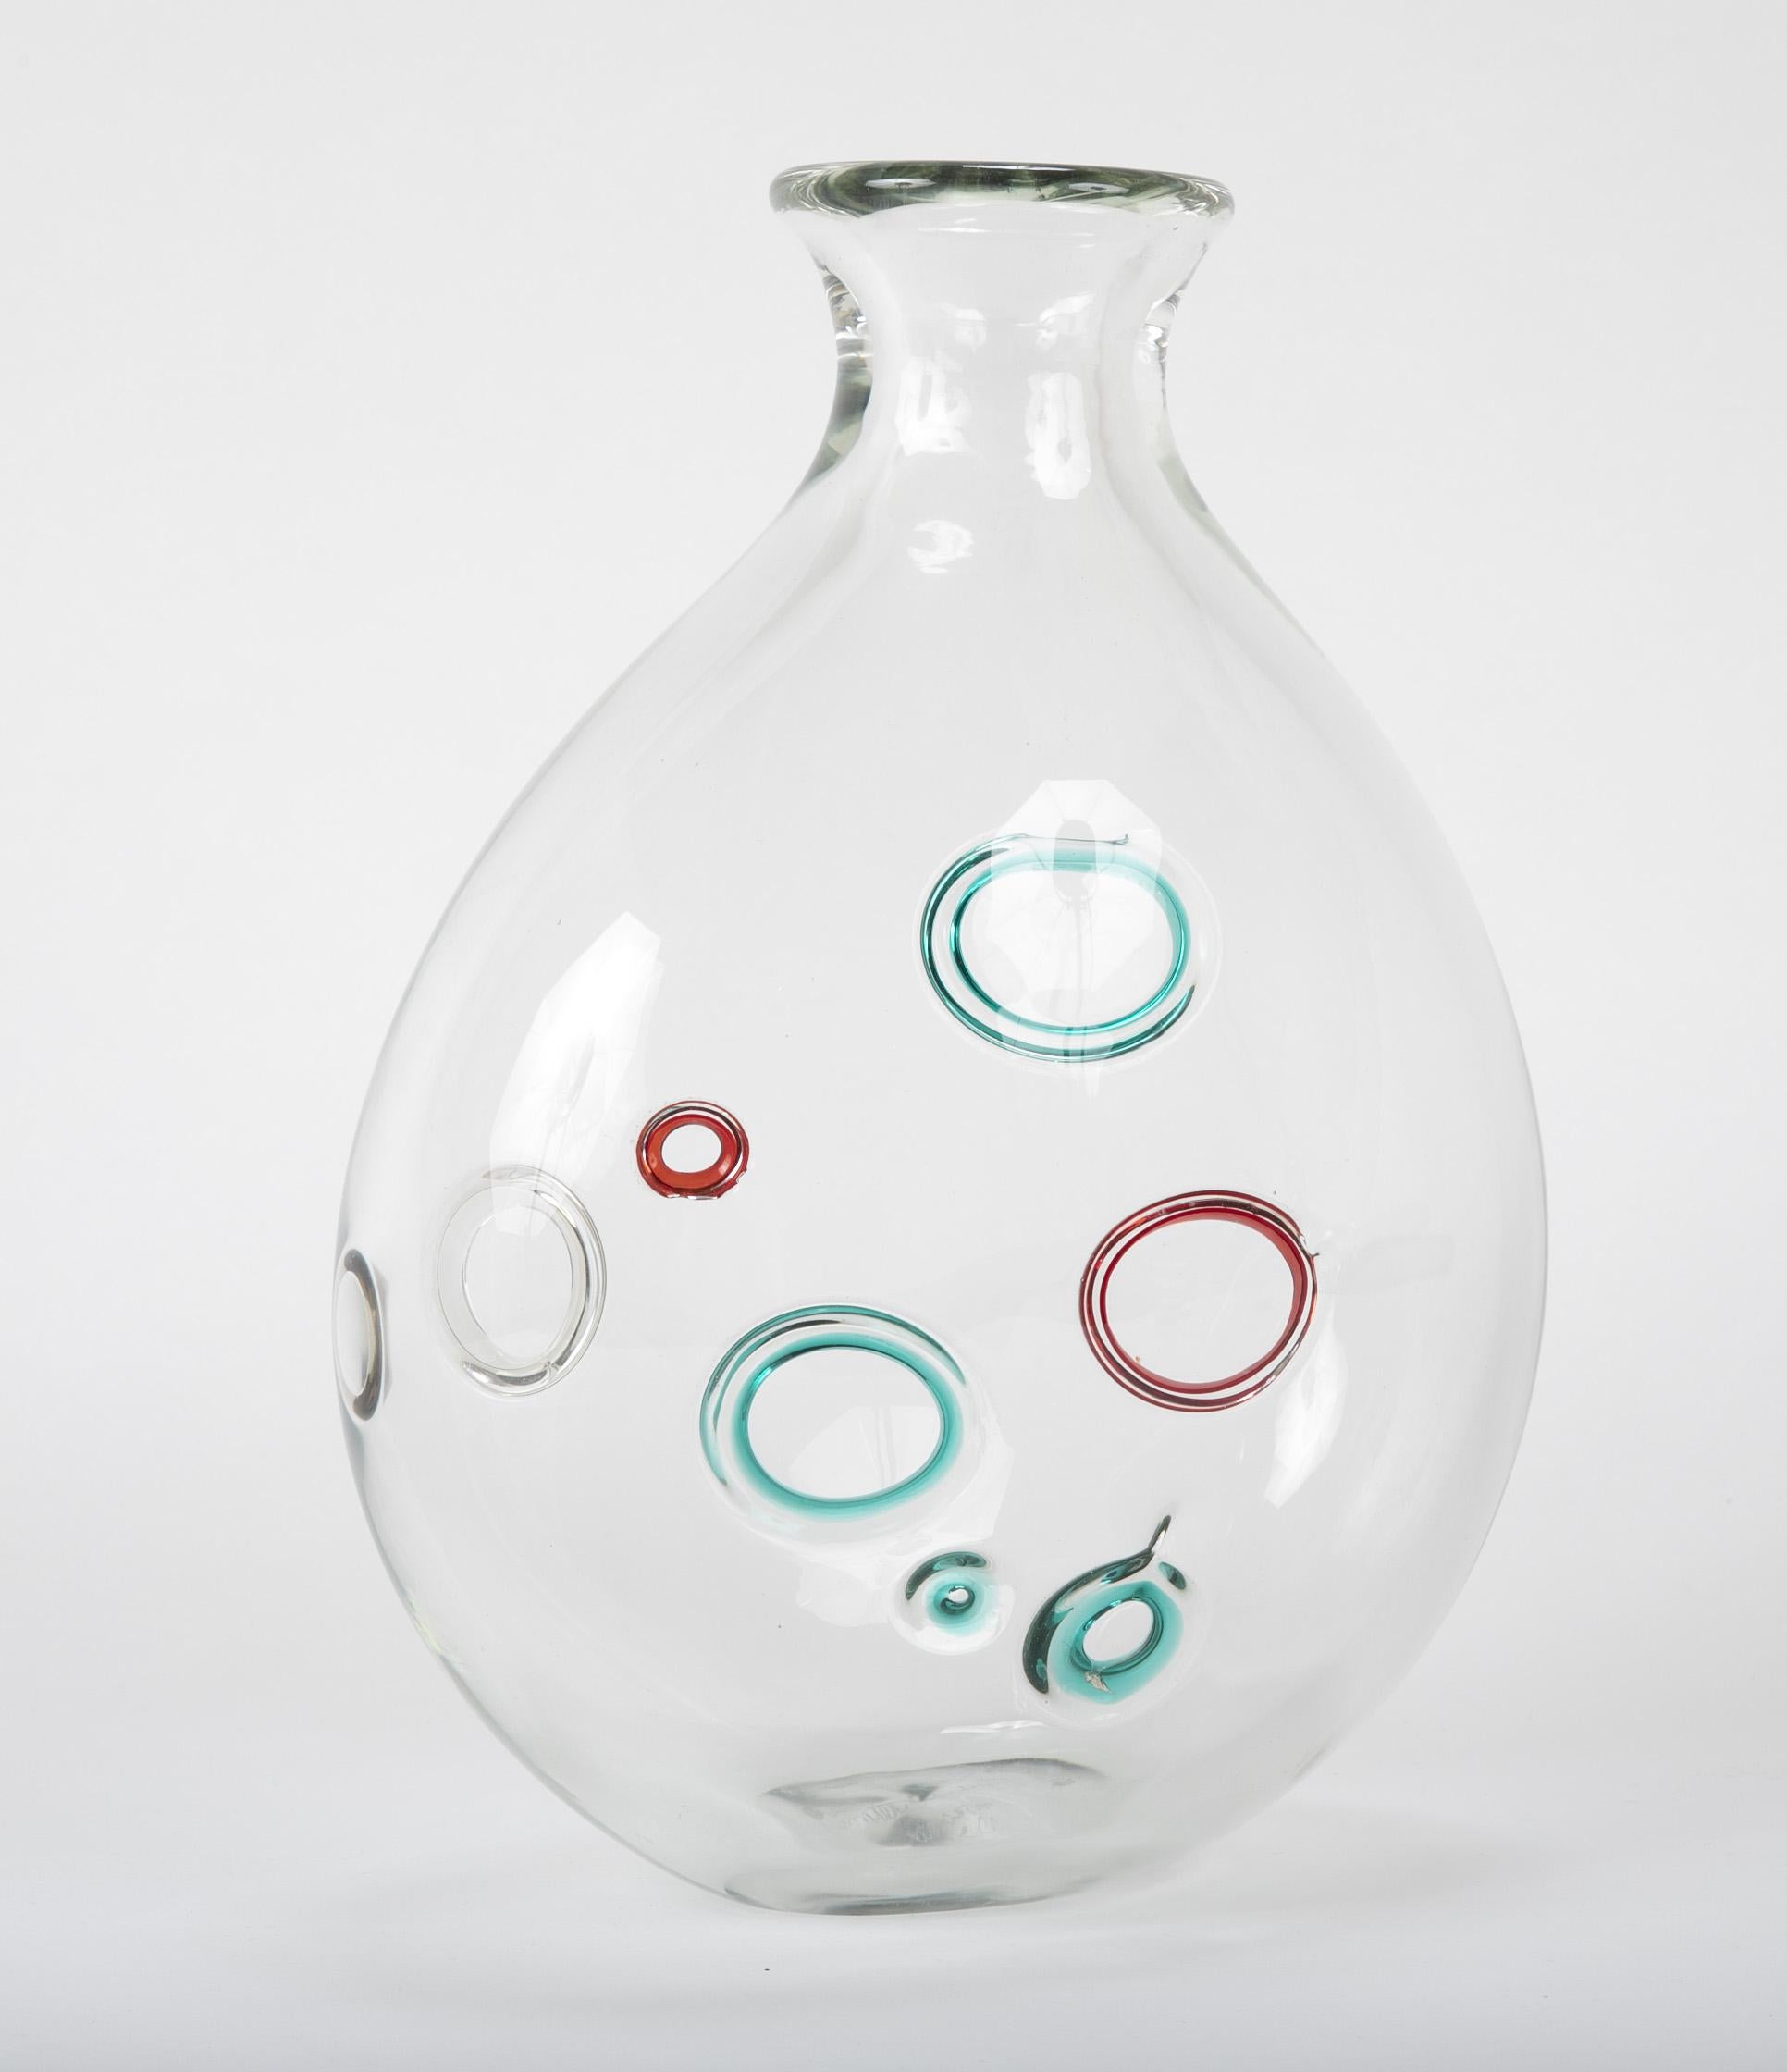 A playful Murano vase with bubbles outlined in colors in the manner of Alfredo Barbini.